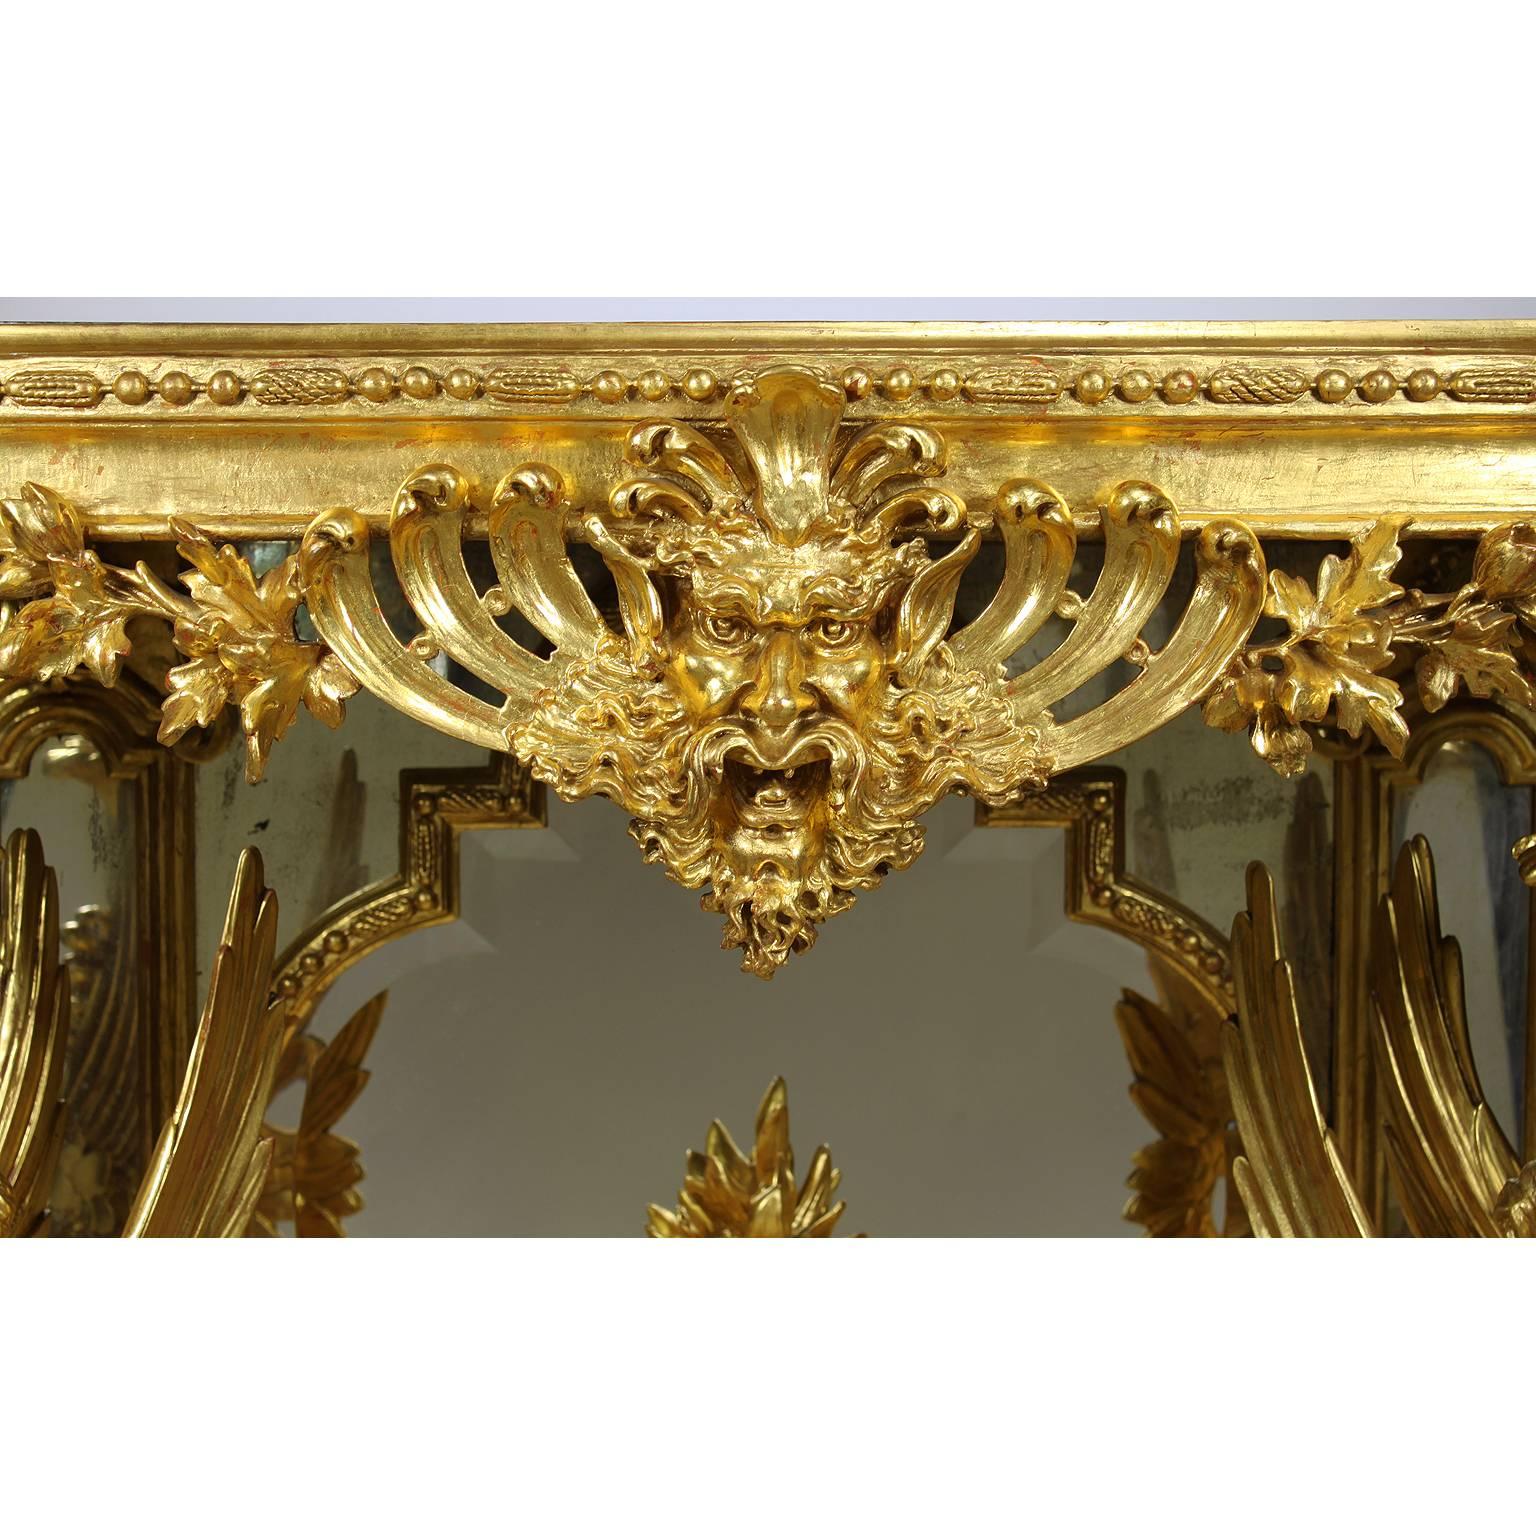 French Empire Revival 19th Century Giltwood Carved Figural Console and Mirror For Sale 4